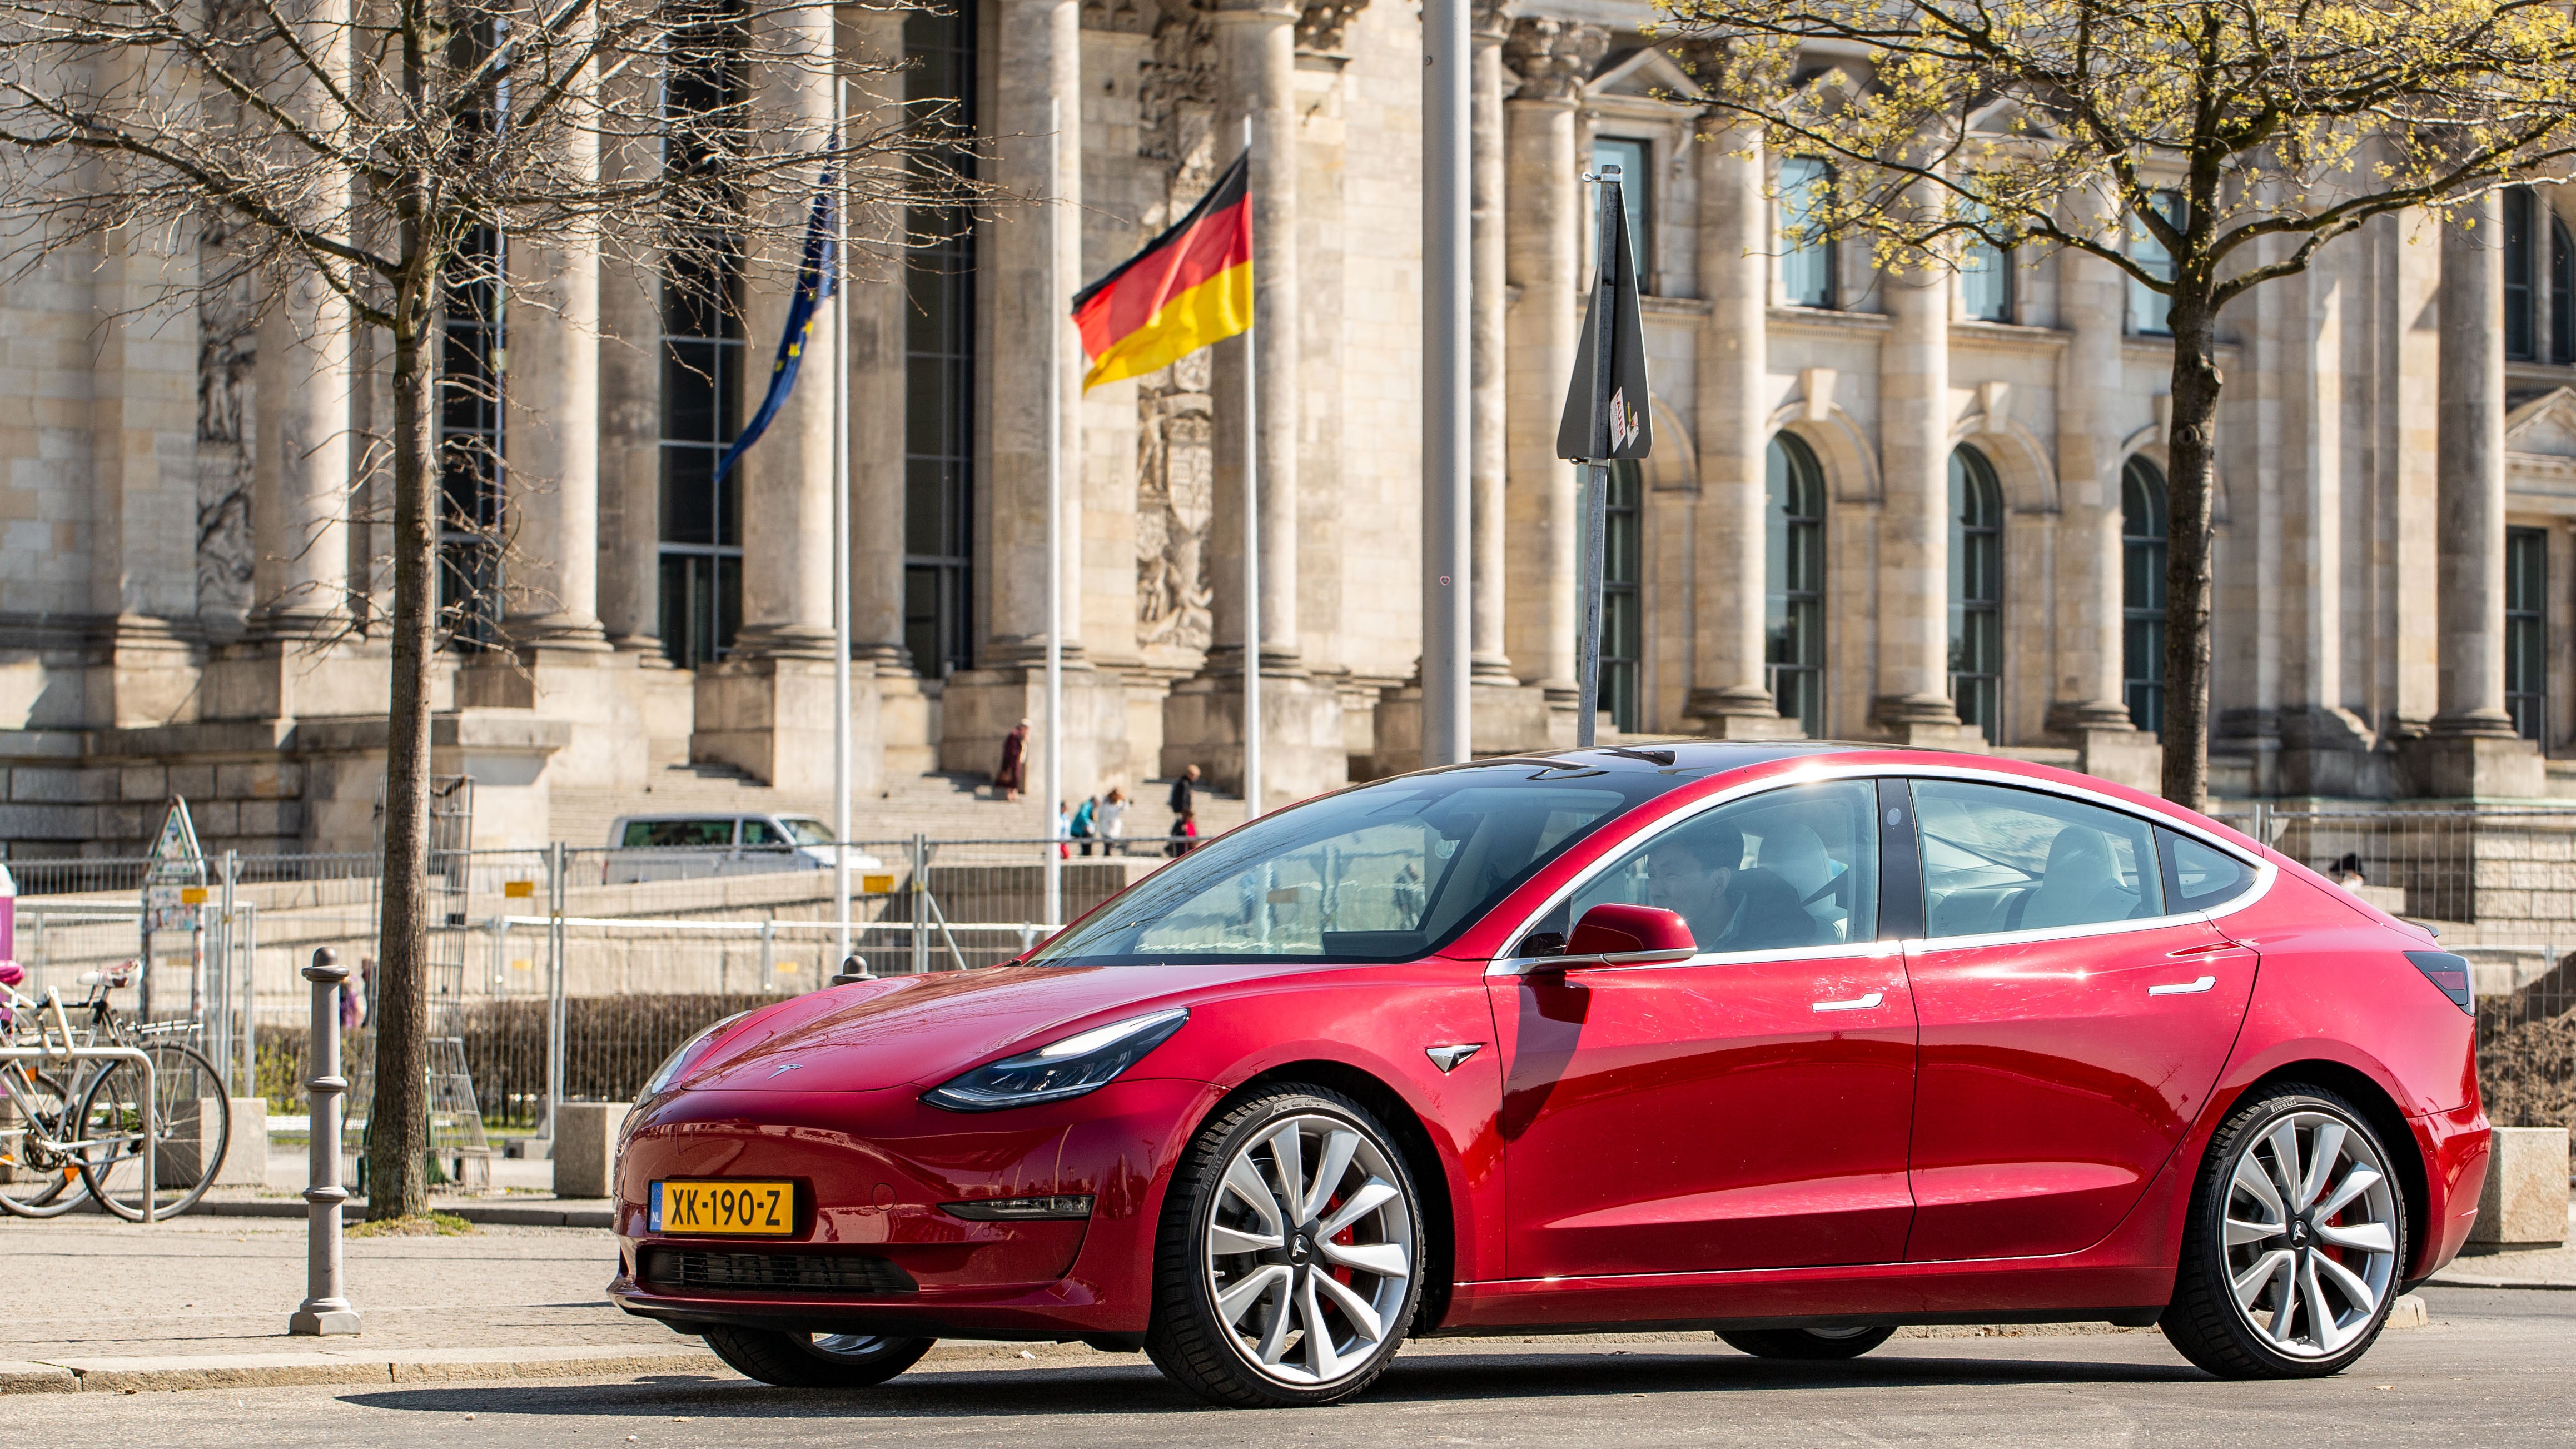 Germany Tesla Model 3 New Owners Are Mainly Switched From Germany Car Brands Like VW, BMW & Mercedes Benz